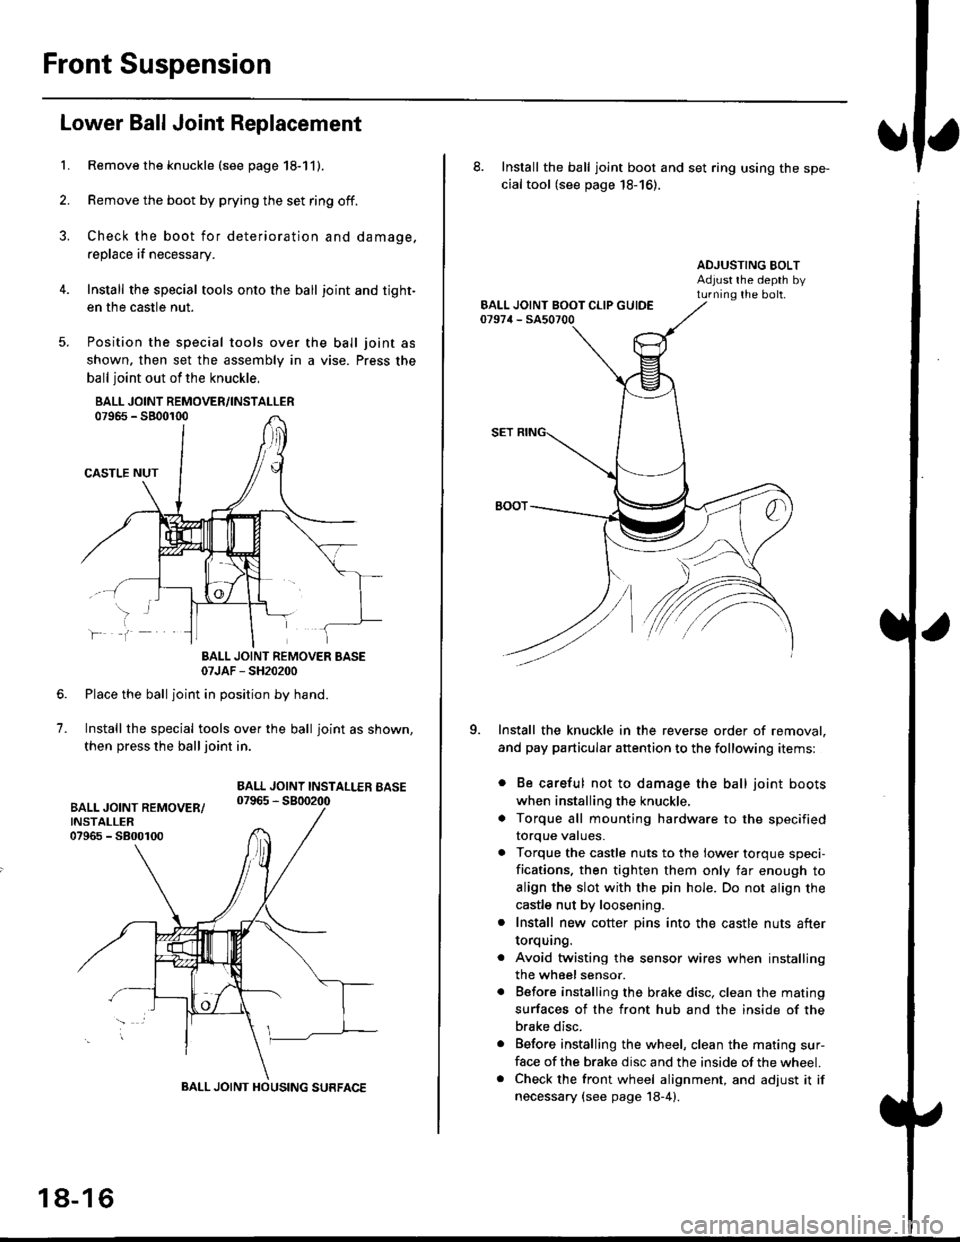 HONDA CIVIC 1996 6.G Workshop Manual Front Suspension
L
Lower Ball Joint Replacement
Remove the knuckle (see page 18-11).
Remove the boot by prying the set ring off.
Check the boot for deterioration and damage.
replace if necessary.
Inst